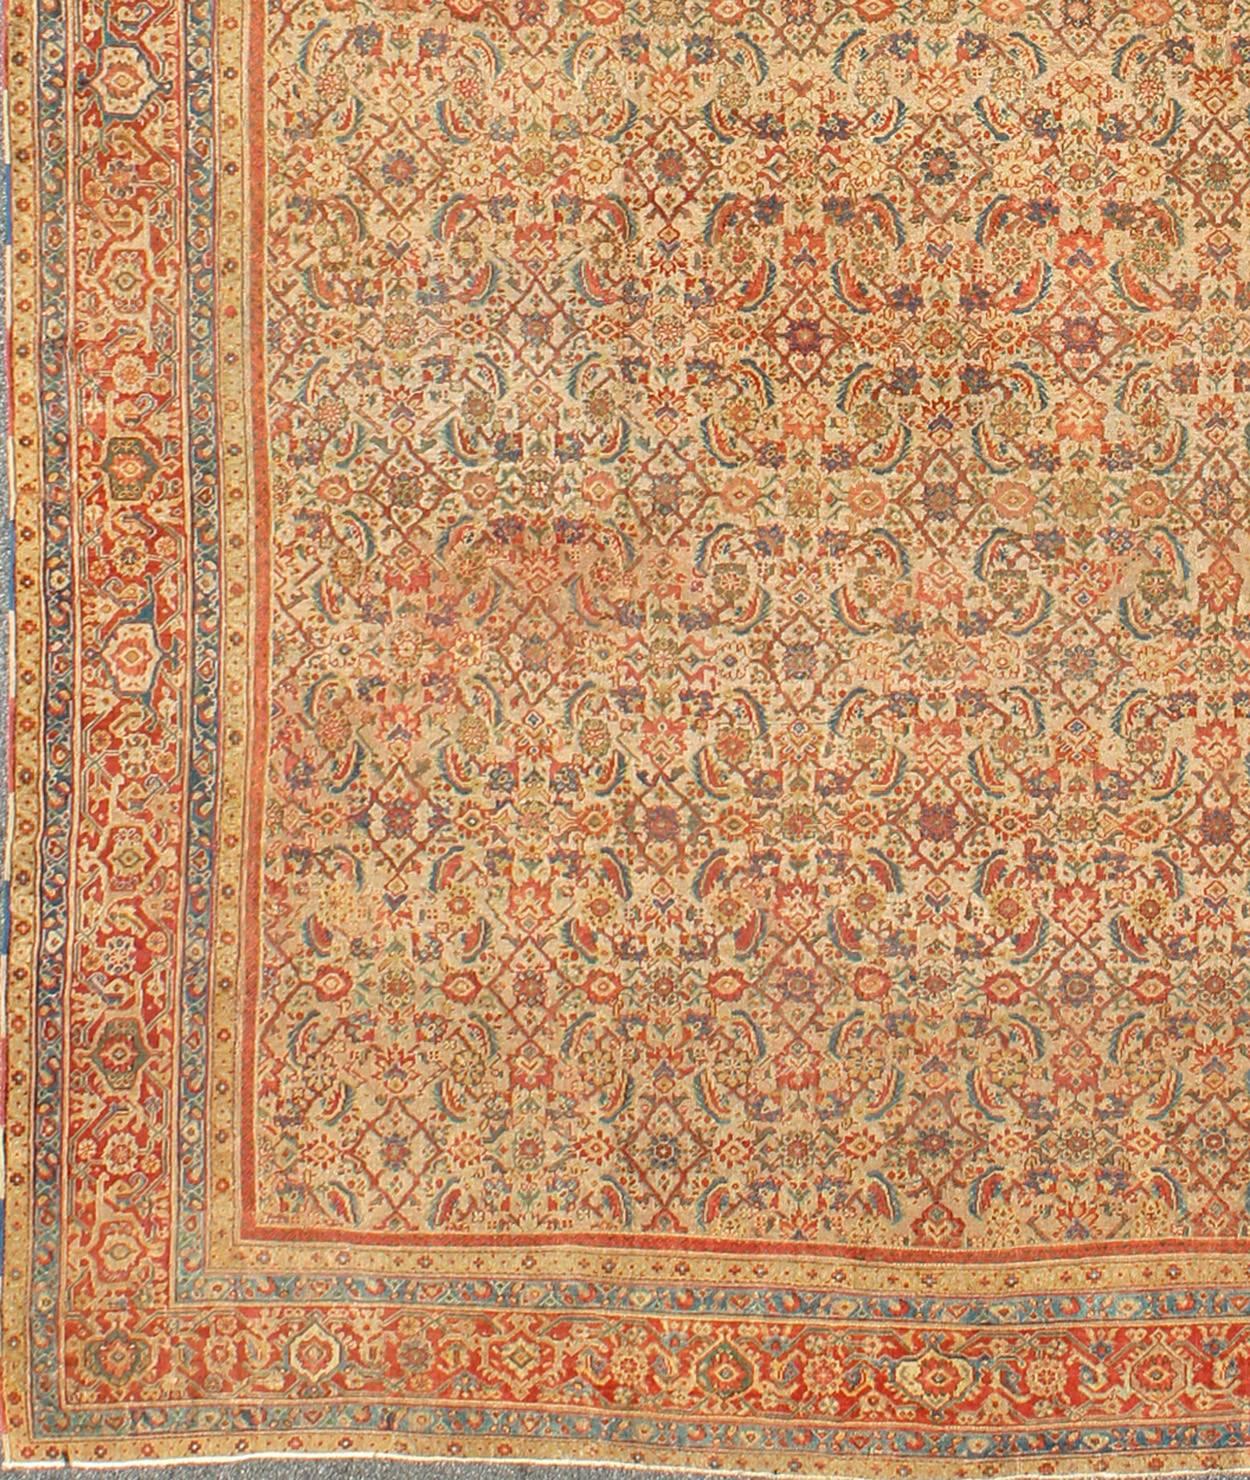 Grandiose Antique Persian Sultanabad Rug in Tan Background, Rust Red, Green, Blue and Multi colors. This highly sophisticated antique Sultanabad Mahal beautifully illustrates the complexities of turn-of-the-century Persian craftsmanship and design.